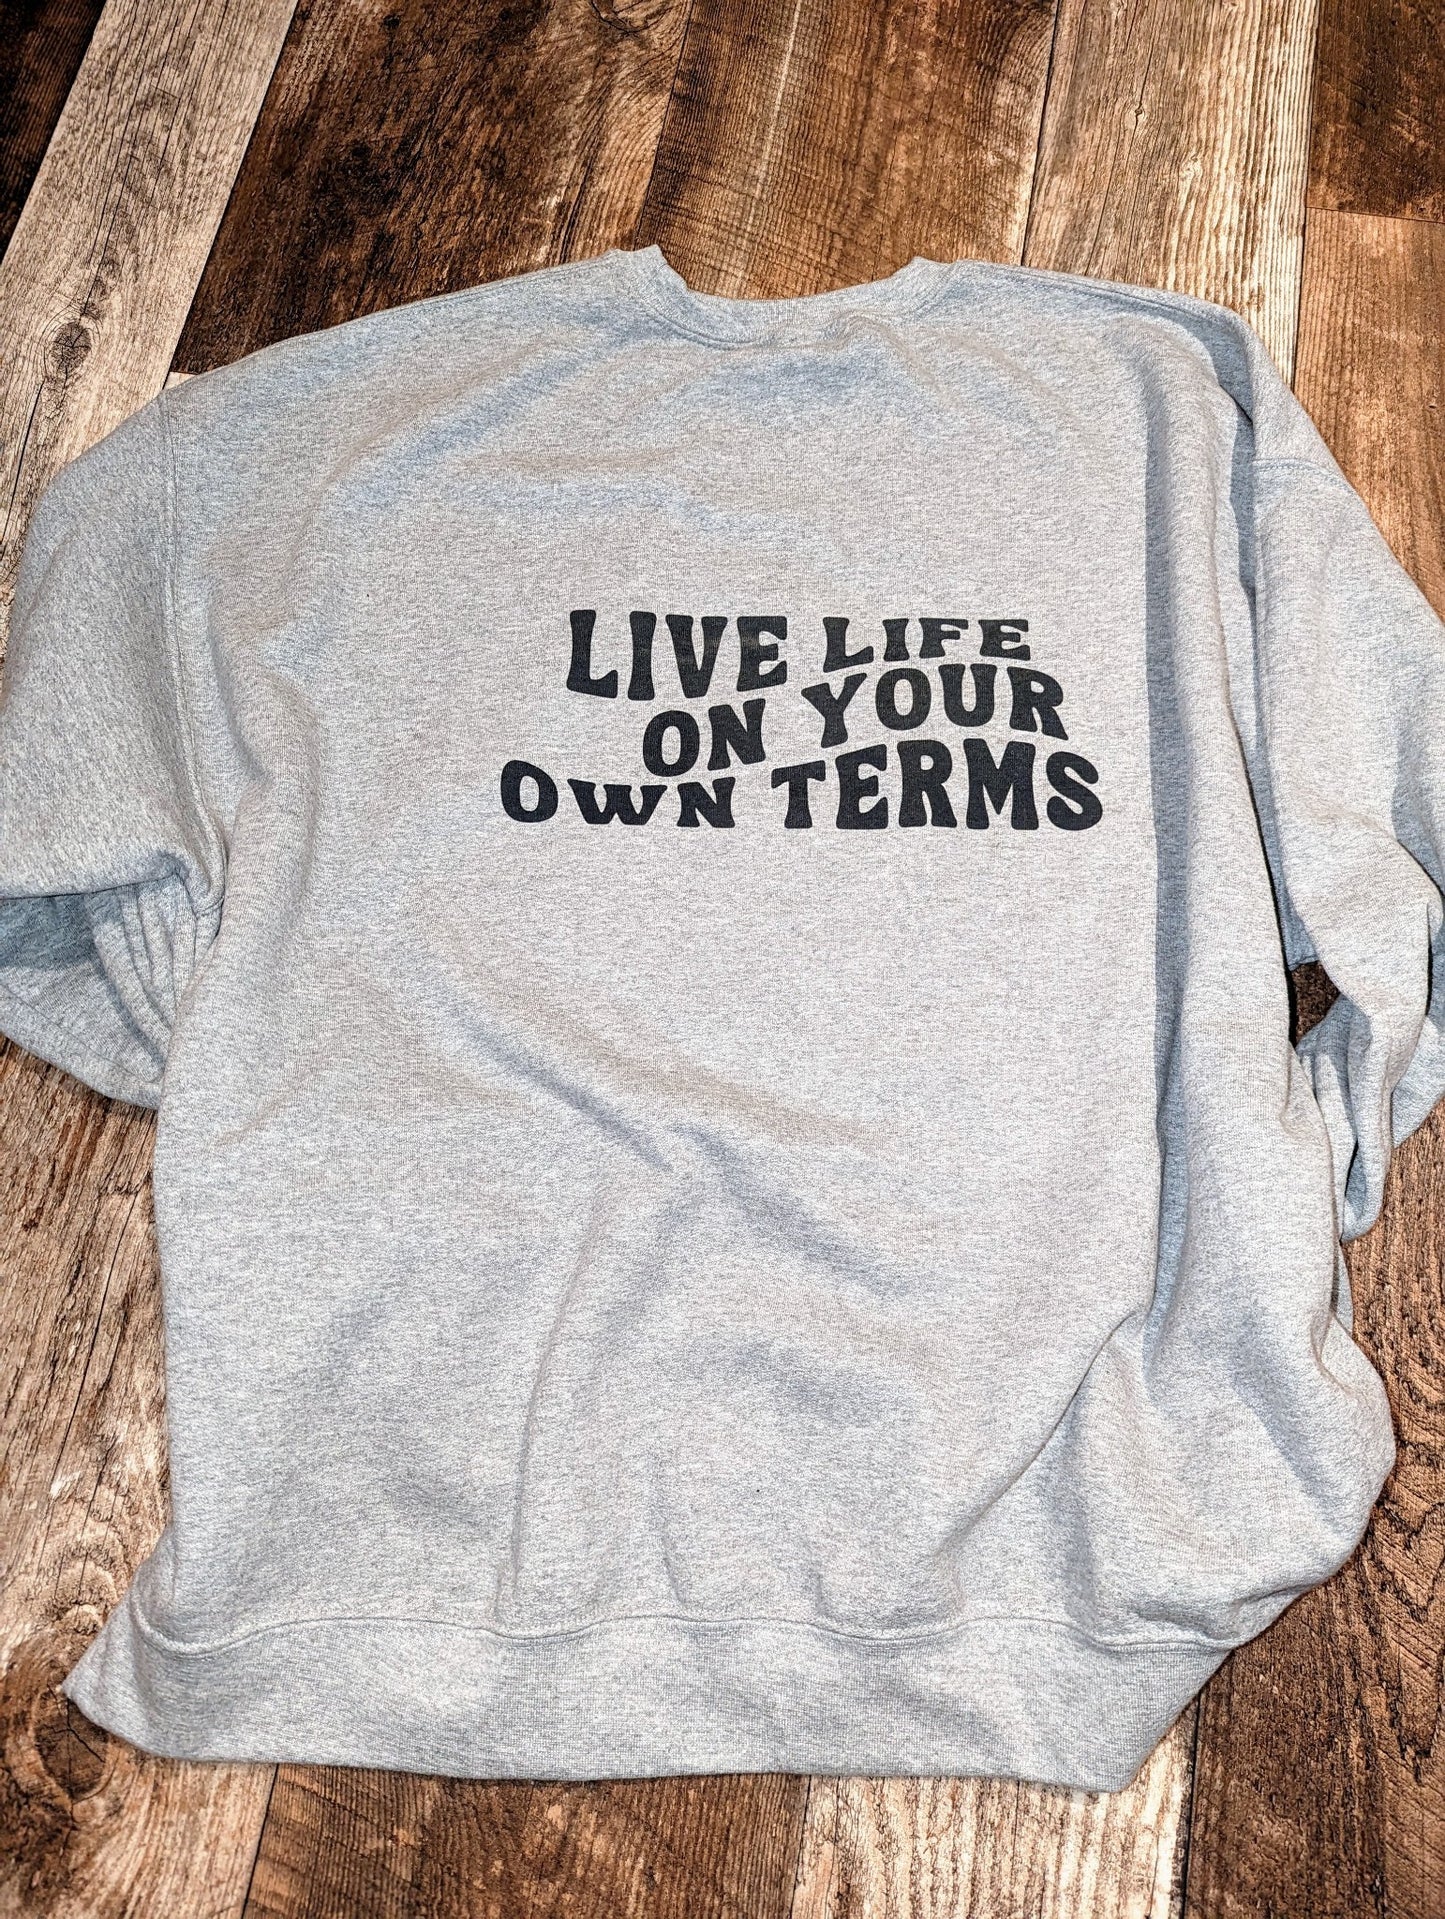 Life on your own terms Sublimation crew neck